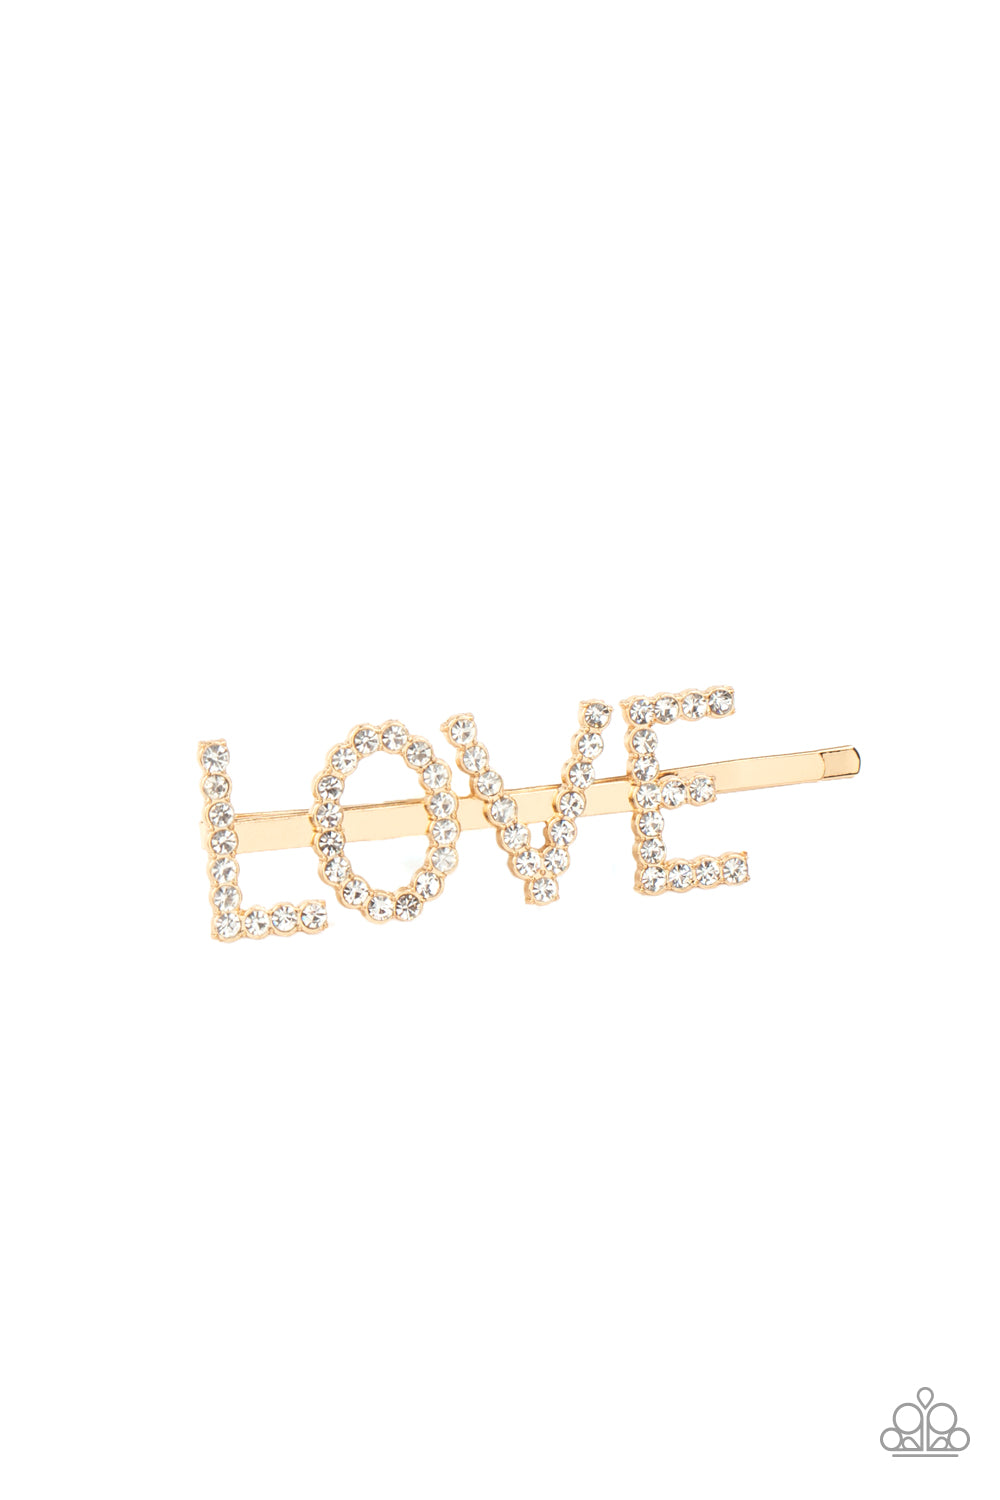 Paparazzi All You Need Is Love - Gold Rhinestone Hair Clip - A Finishing Touch 